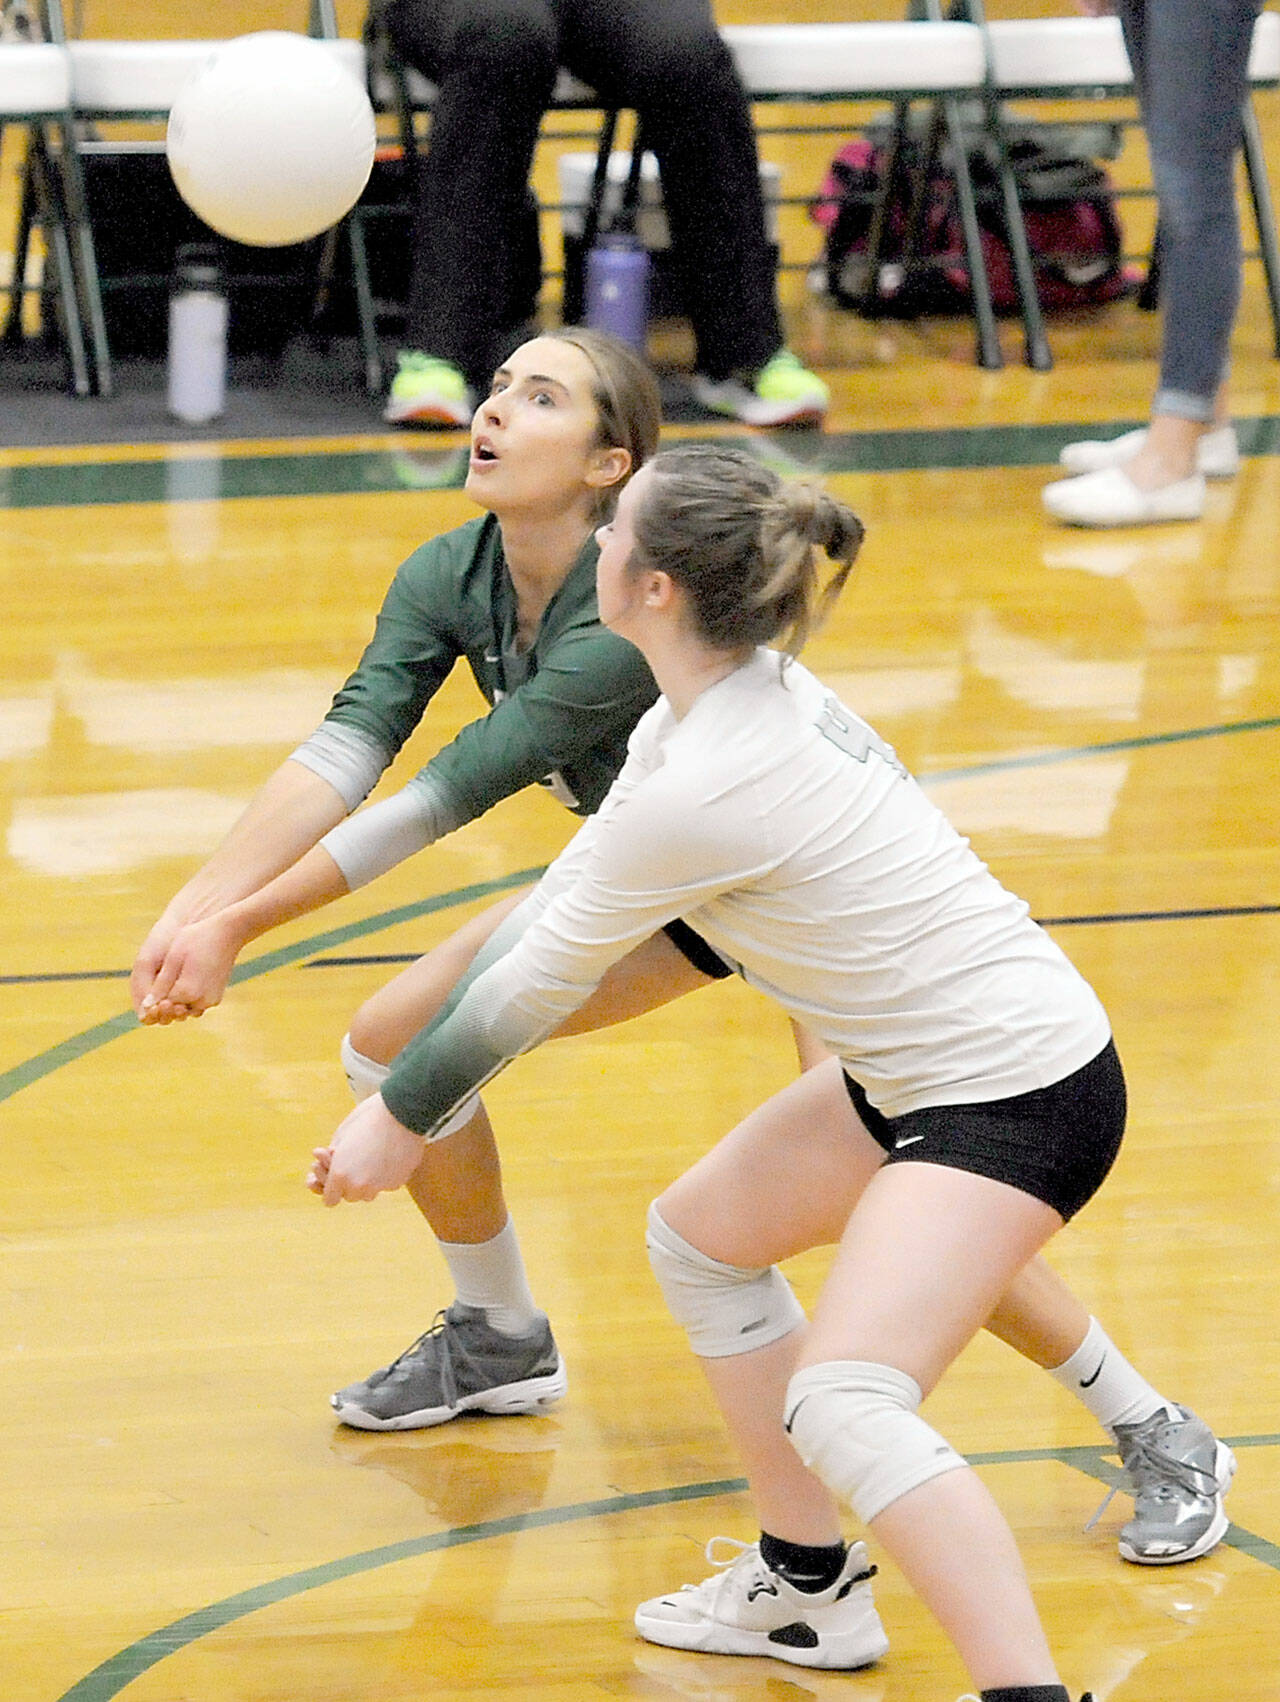 KEITH THORPE/PENINSULA DAILY NEWS Port Angeles’ Mary Halberg, left, and lebero Lily Thomas back each other up on receiving the serve during their match against Bainbridge on Thursday at Port Angeles High School.